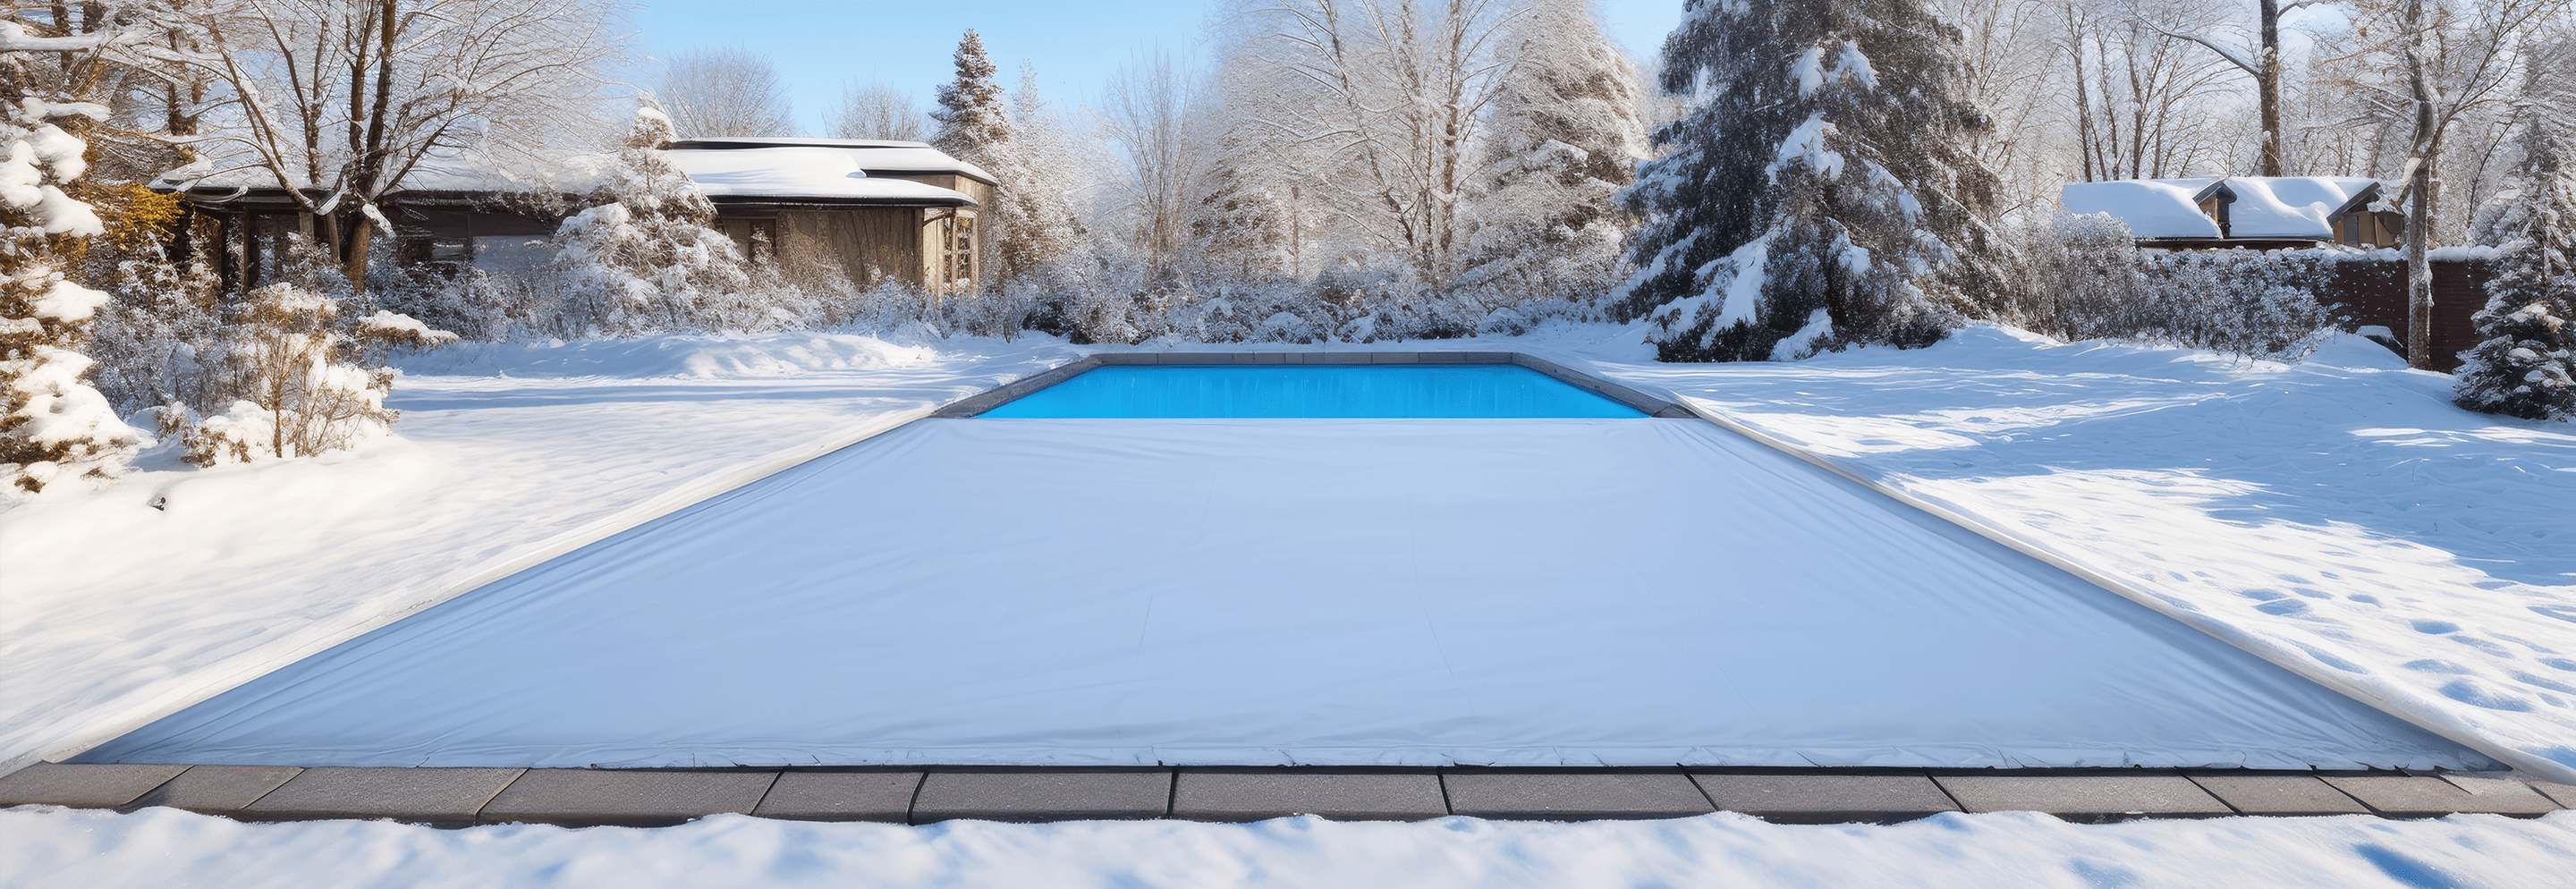 Prepare for the Colder Weather with Our End-of-Season Pool and Spa Checklist